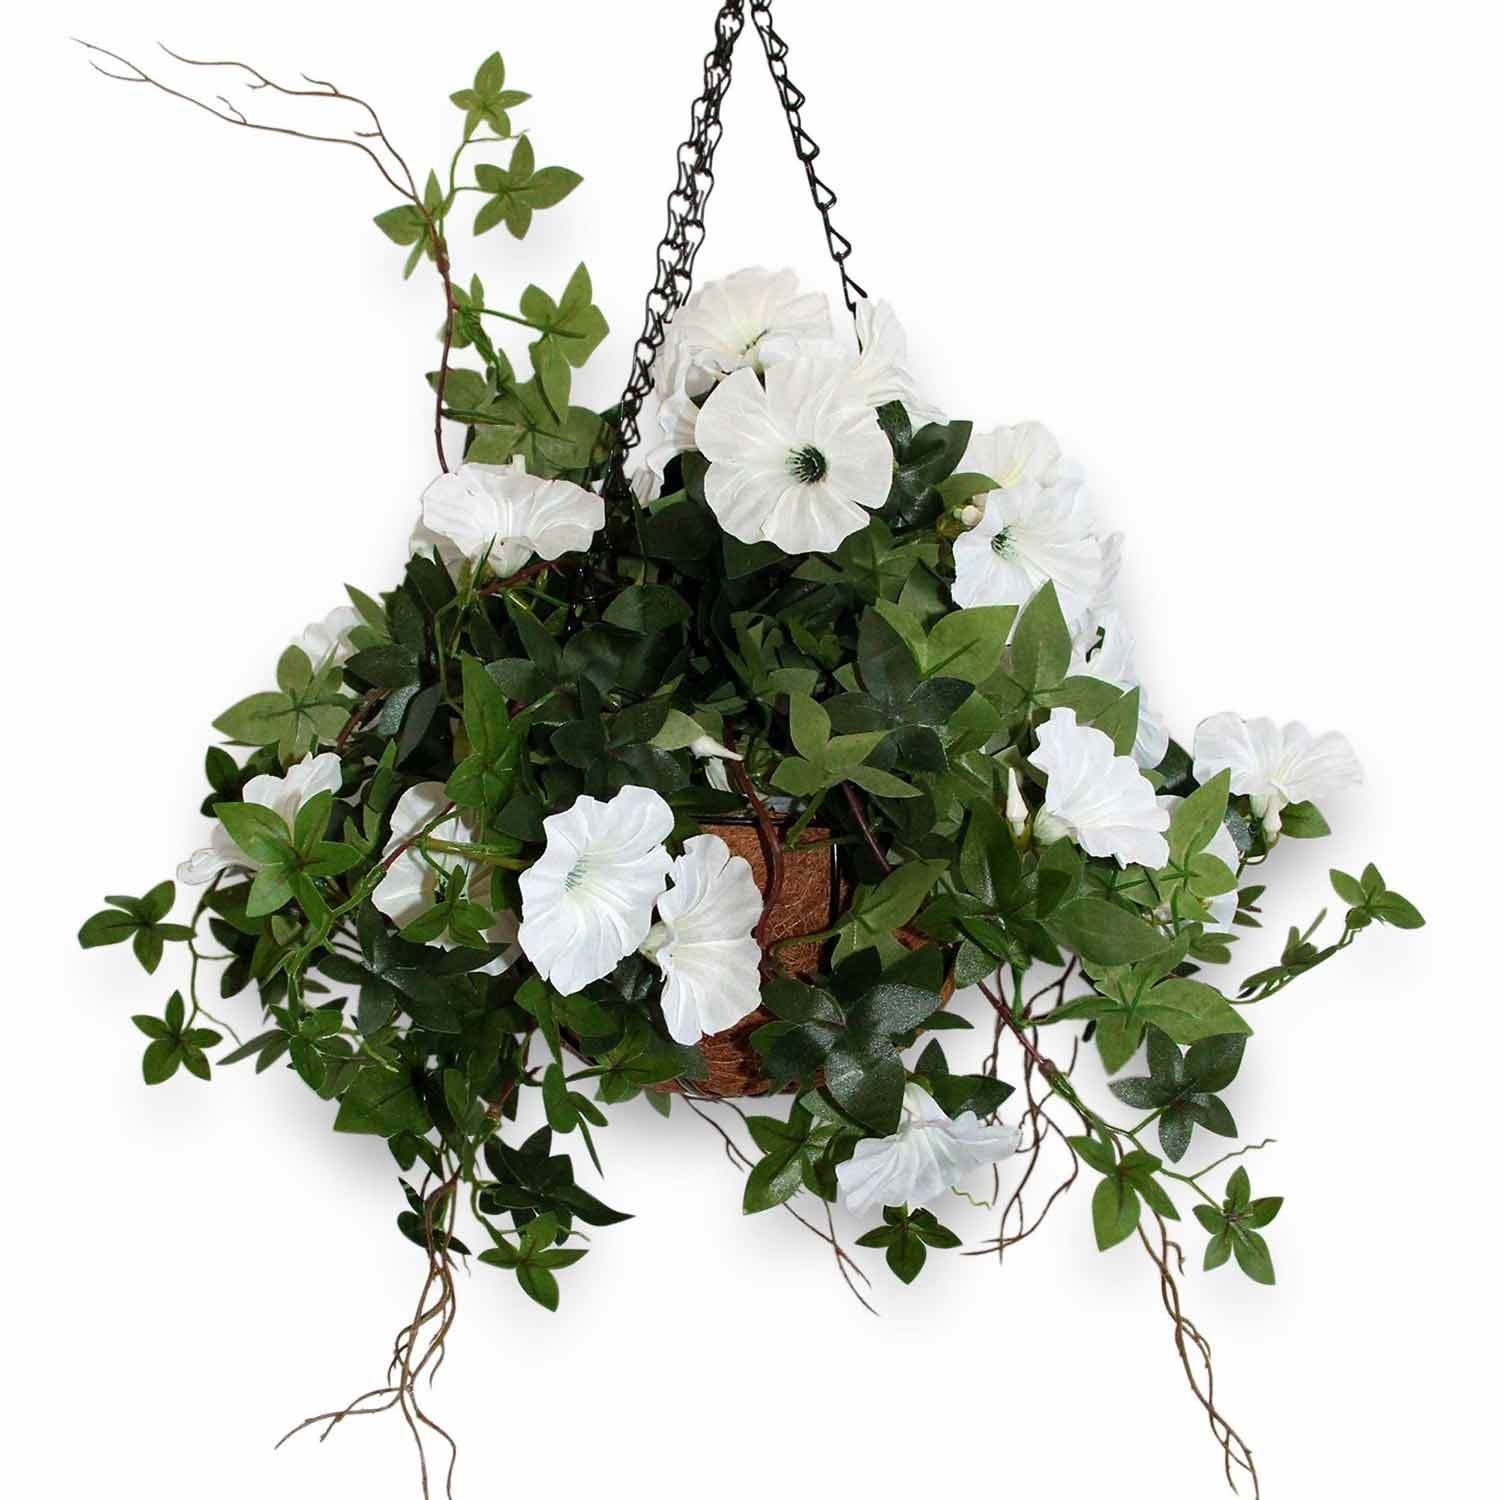 Artificial 'morning glory' white flower hanging basket - The Artificial